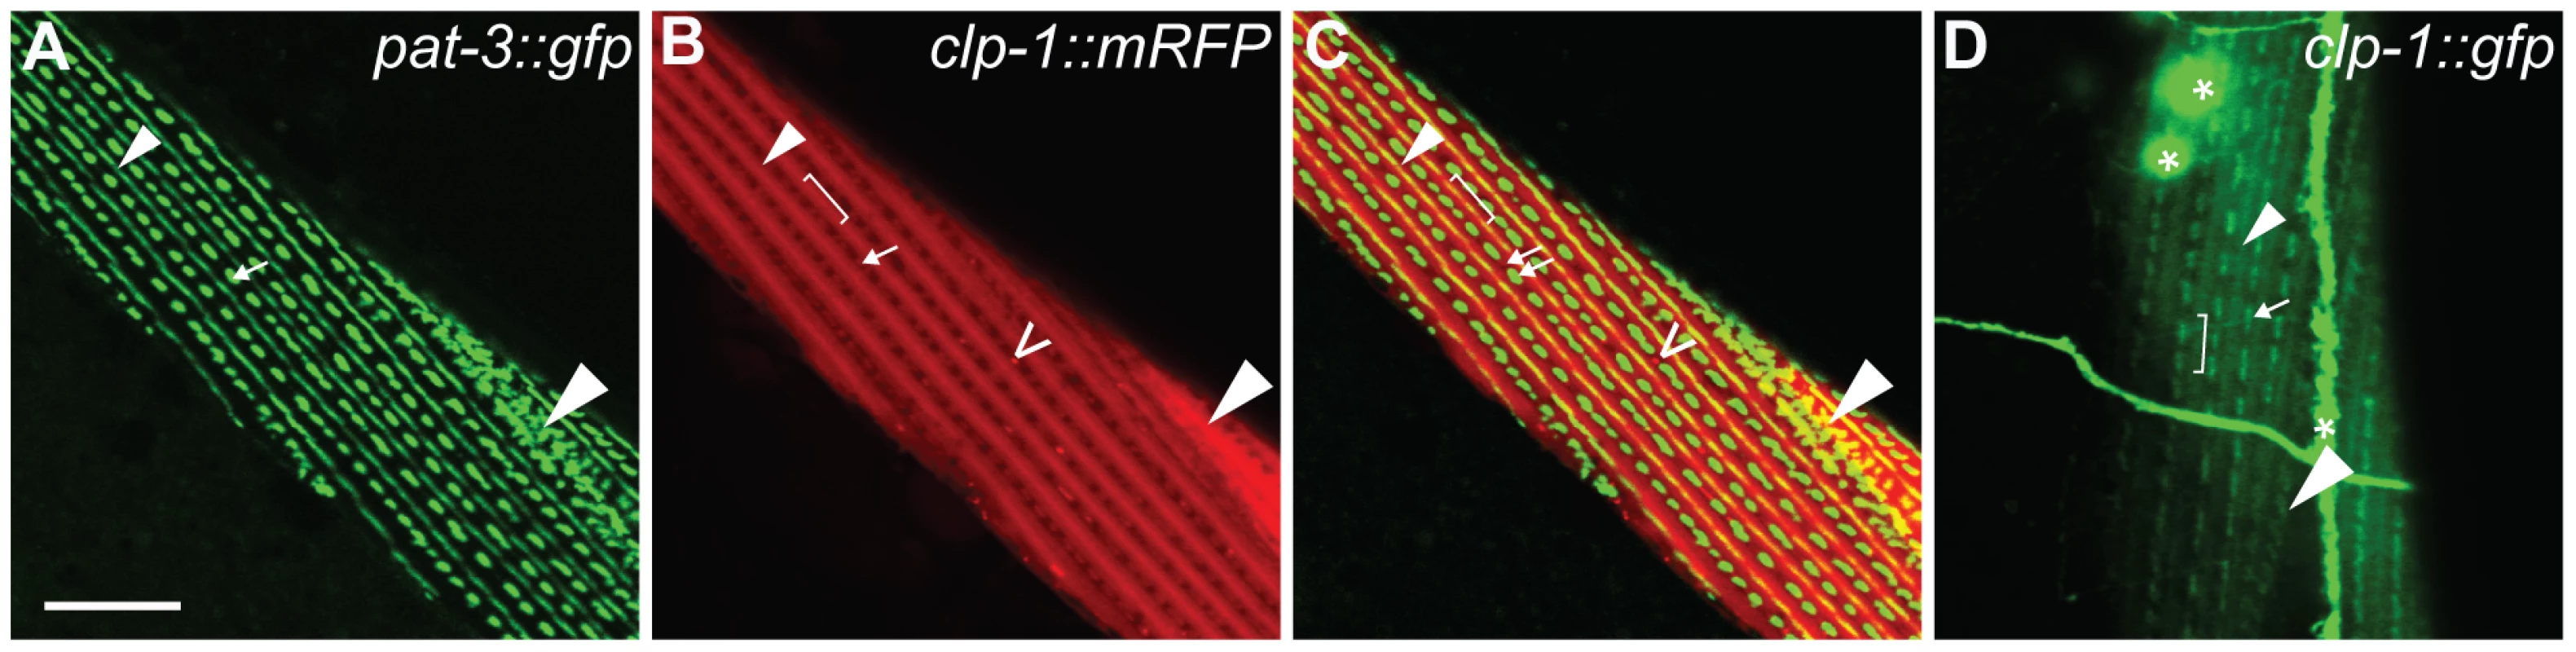 Ectopic <i>unc-54p::clp-1::mrfp</i> localizes to M-lines and adhesions plaques in body wall muscle.